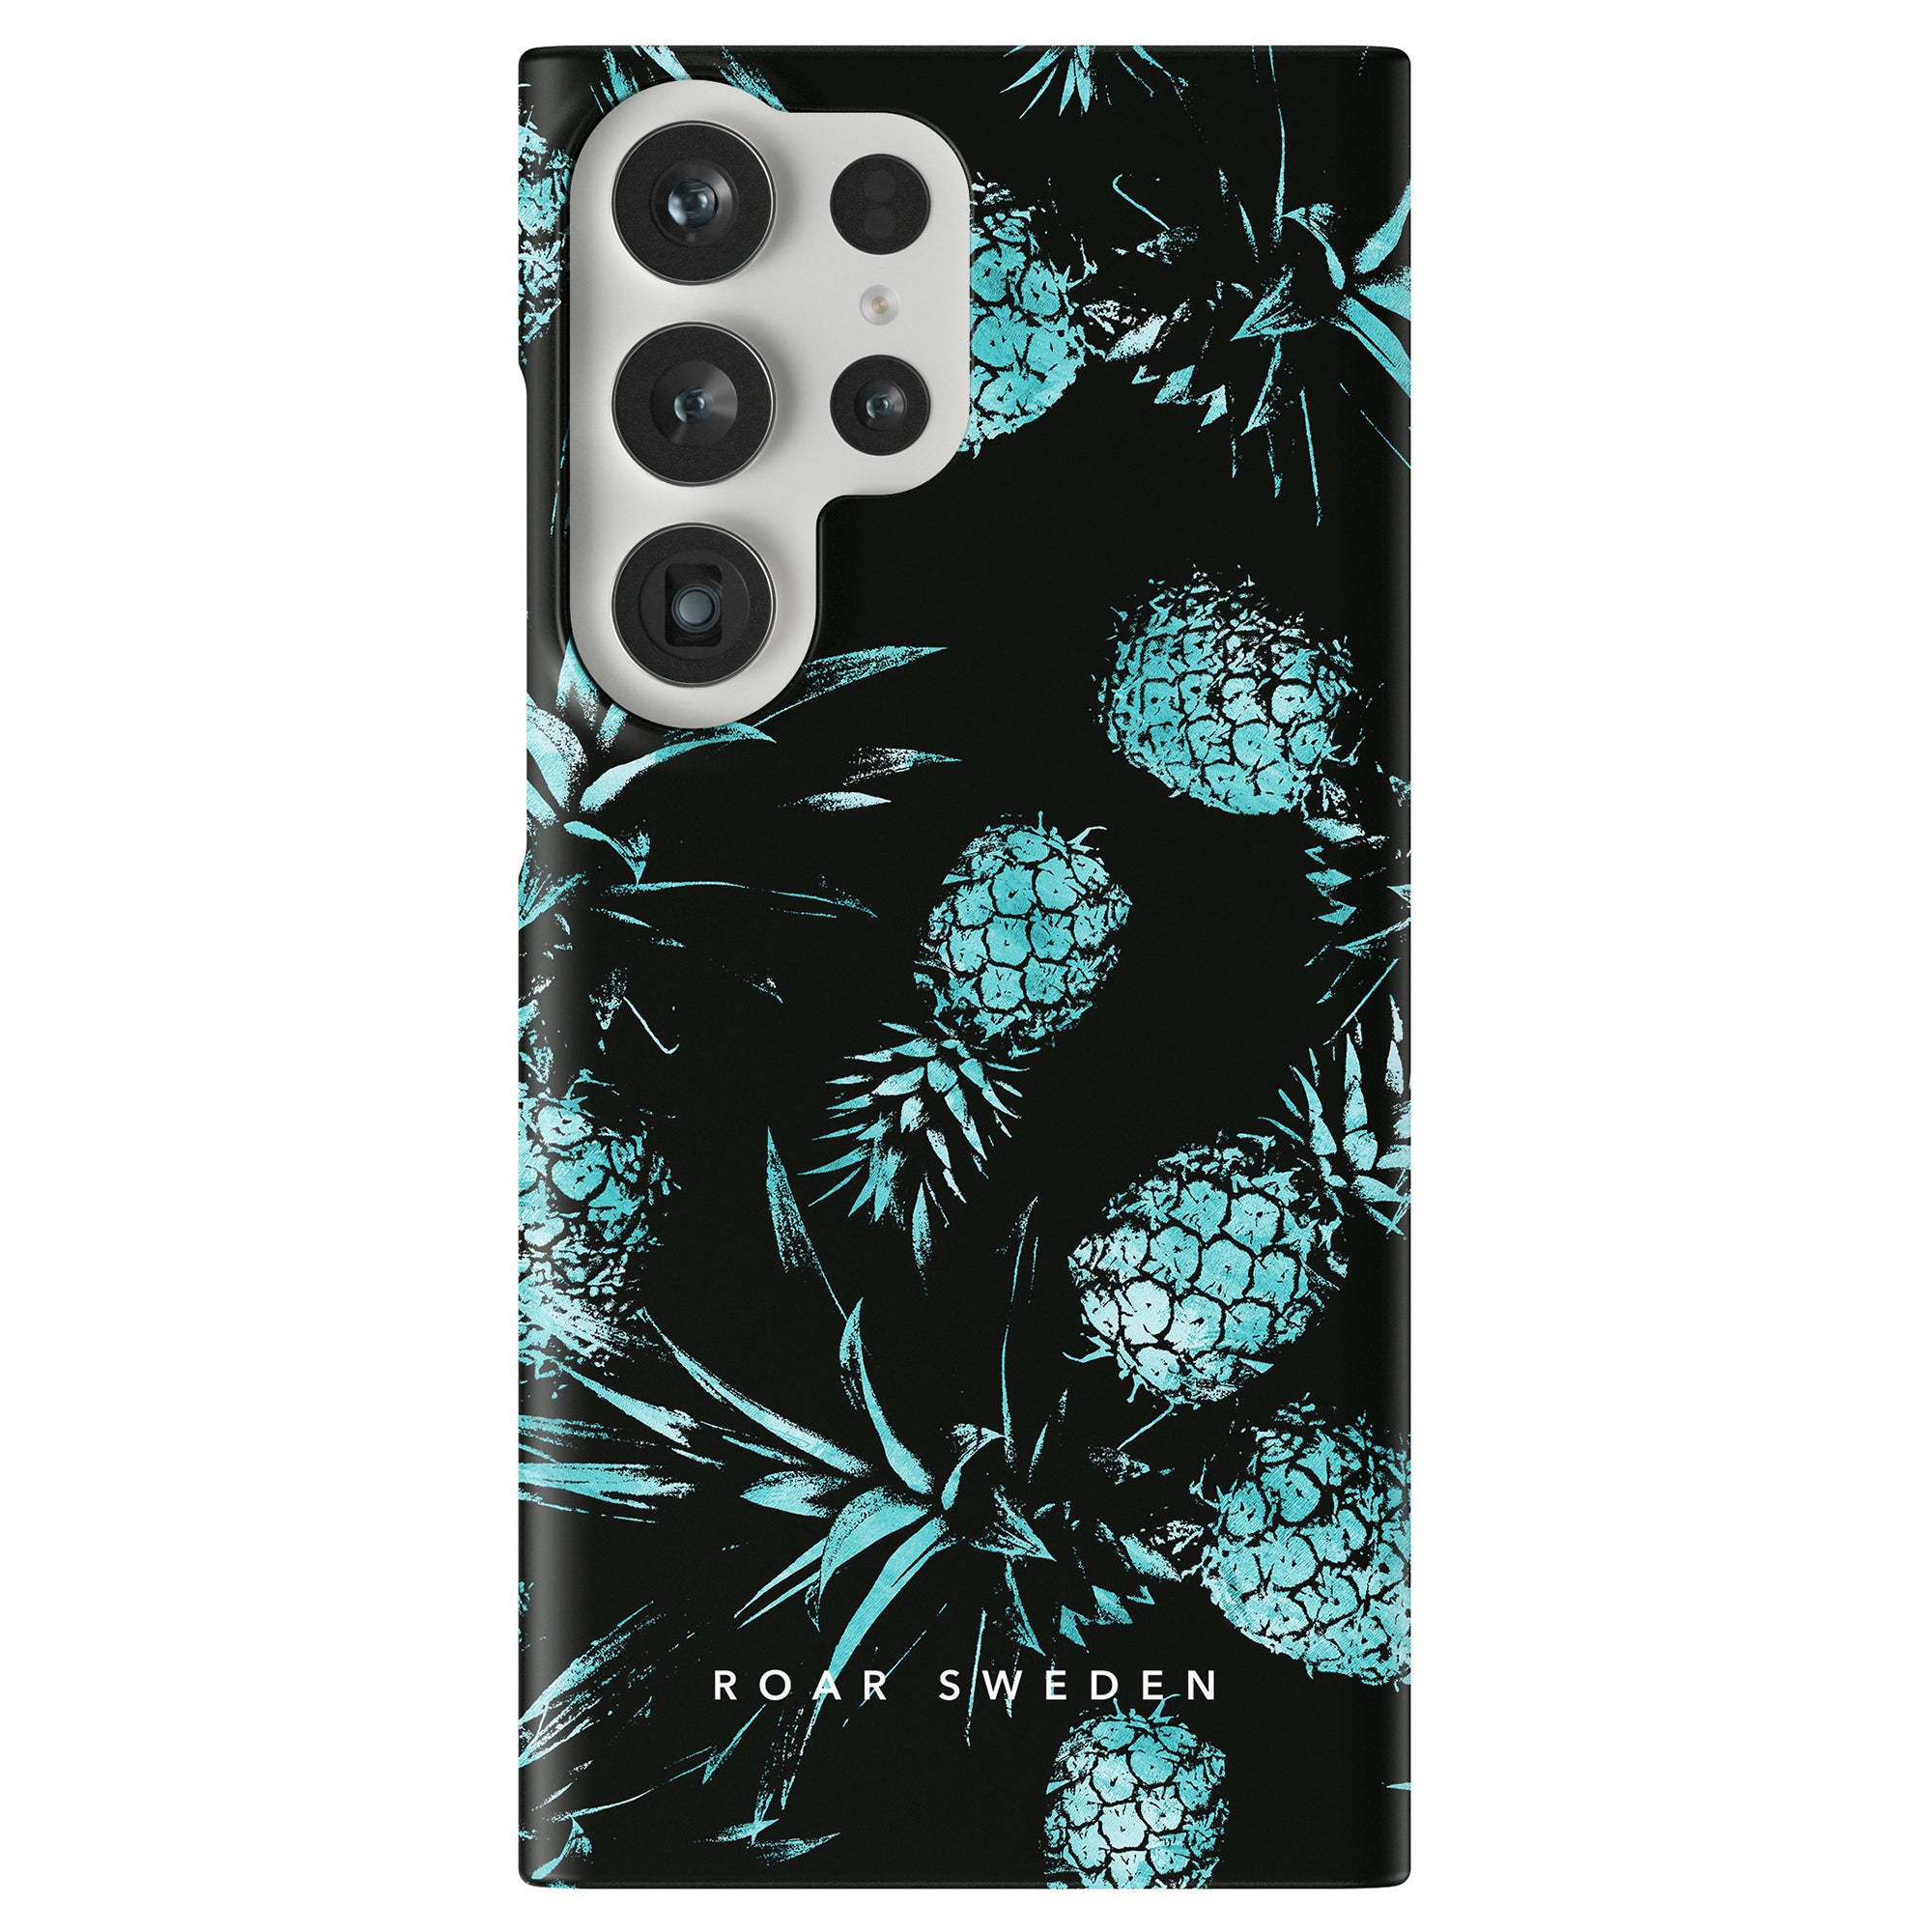 A Turquoise Pineapples - Slim case with a slim black case featuring turquoise pineapples and "ROAR SWEDEN" printed at the bottom, part of the Exotic Collection.